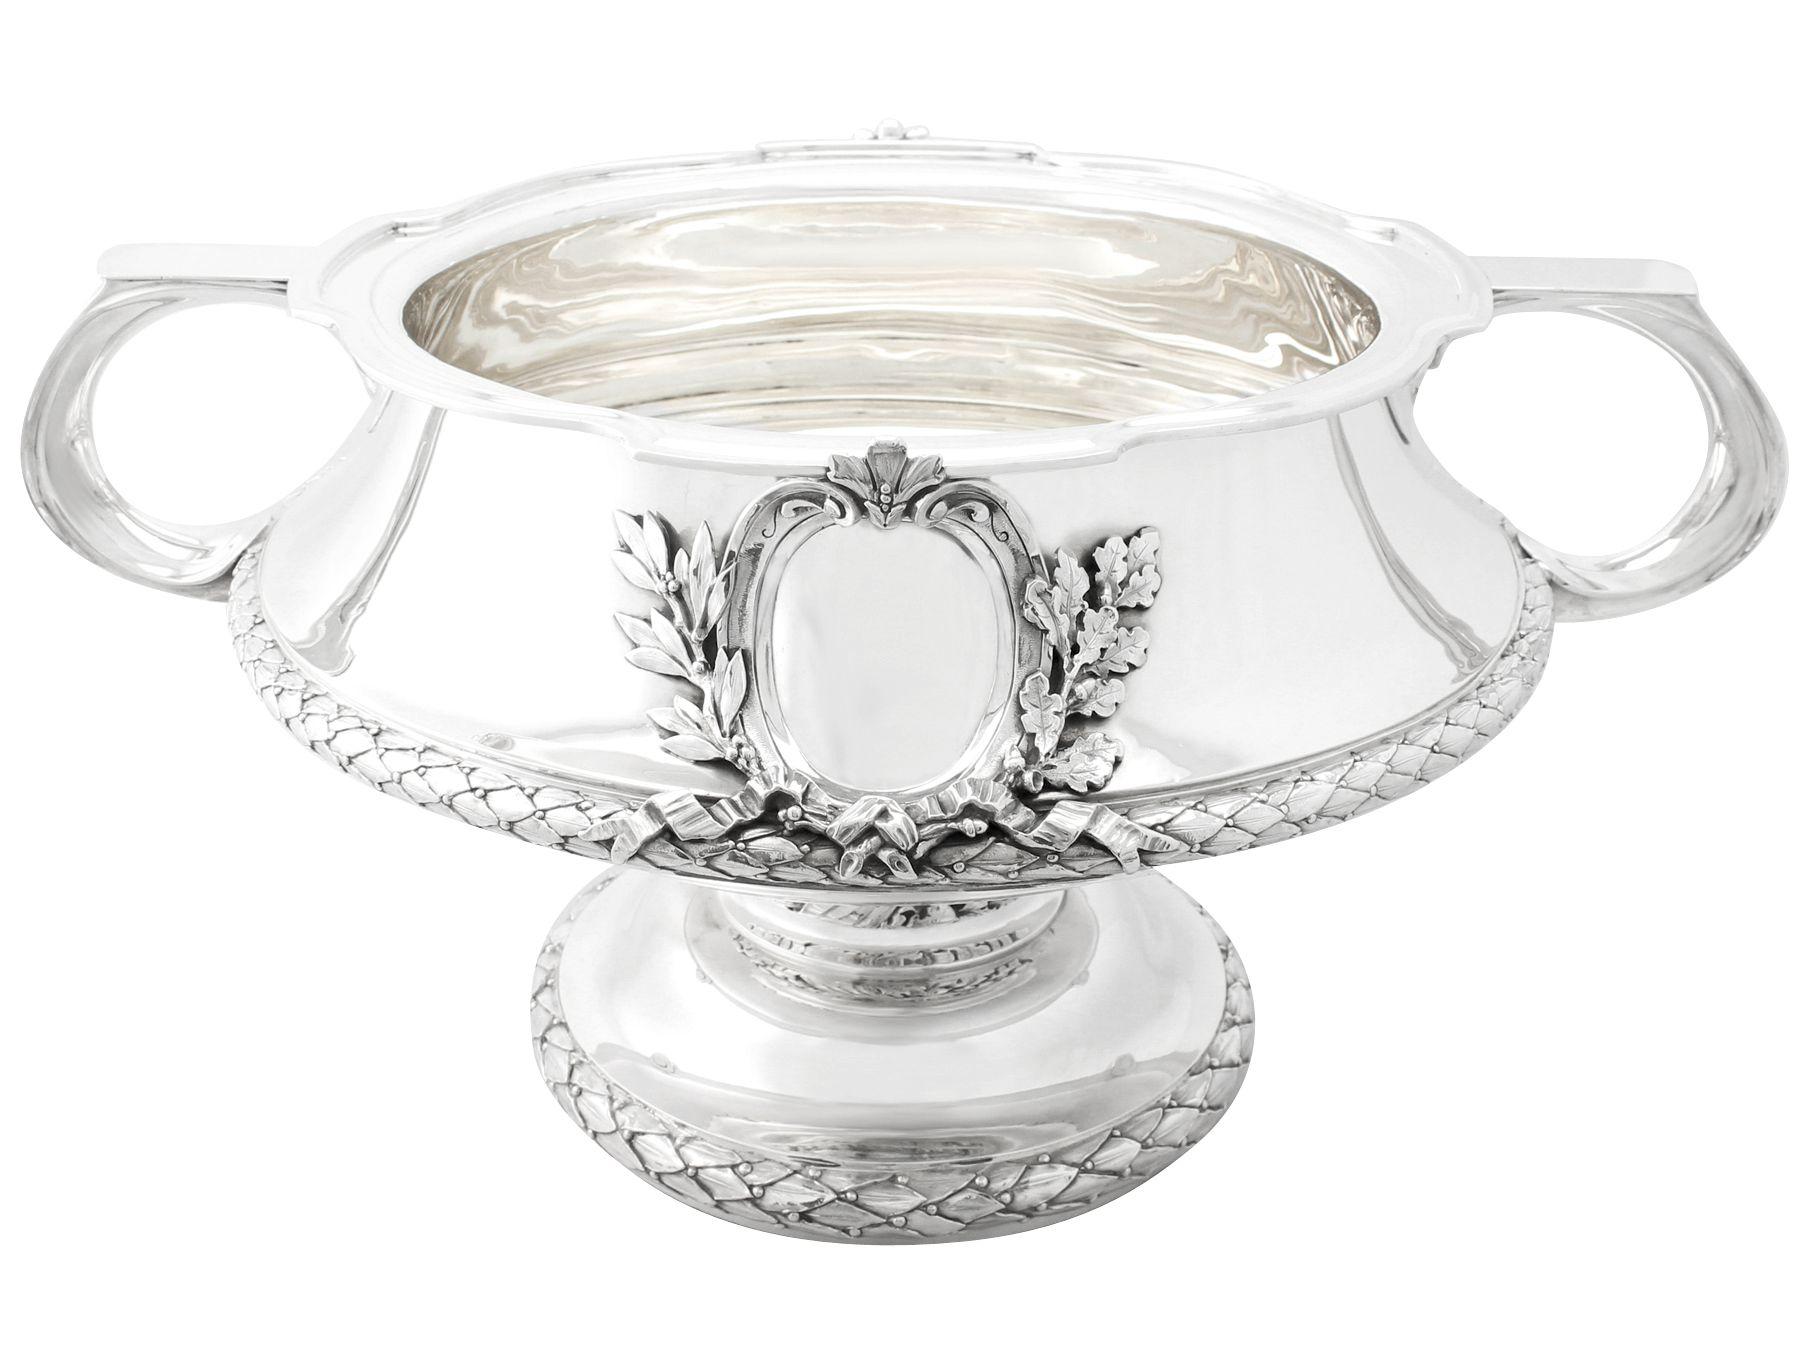 Other Antique Sterling Silver Bowls / Centrepieces For Sale